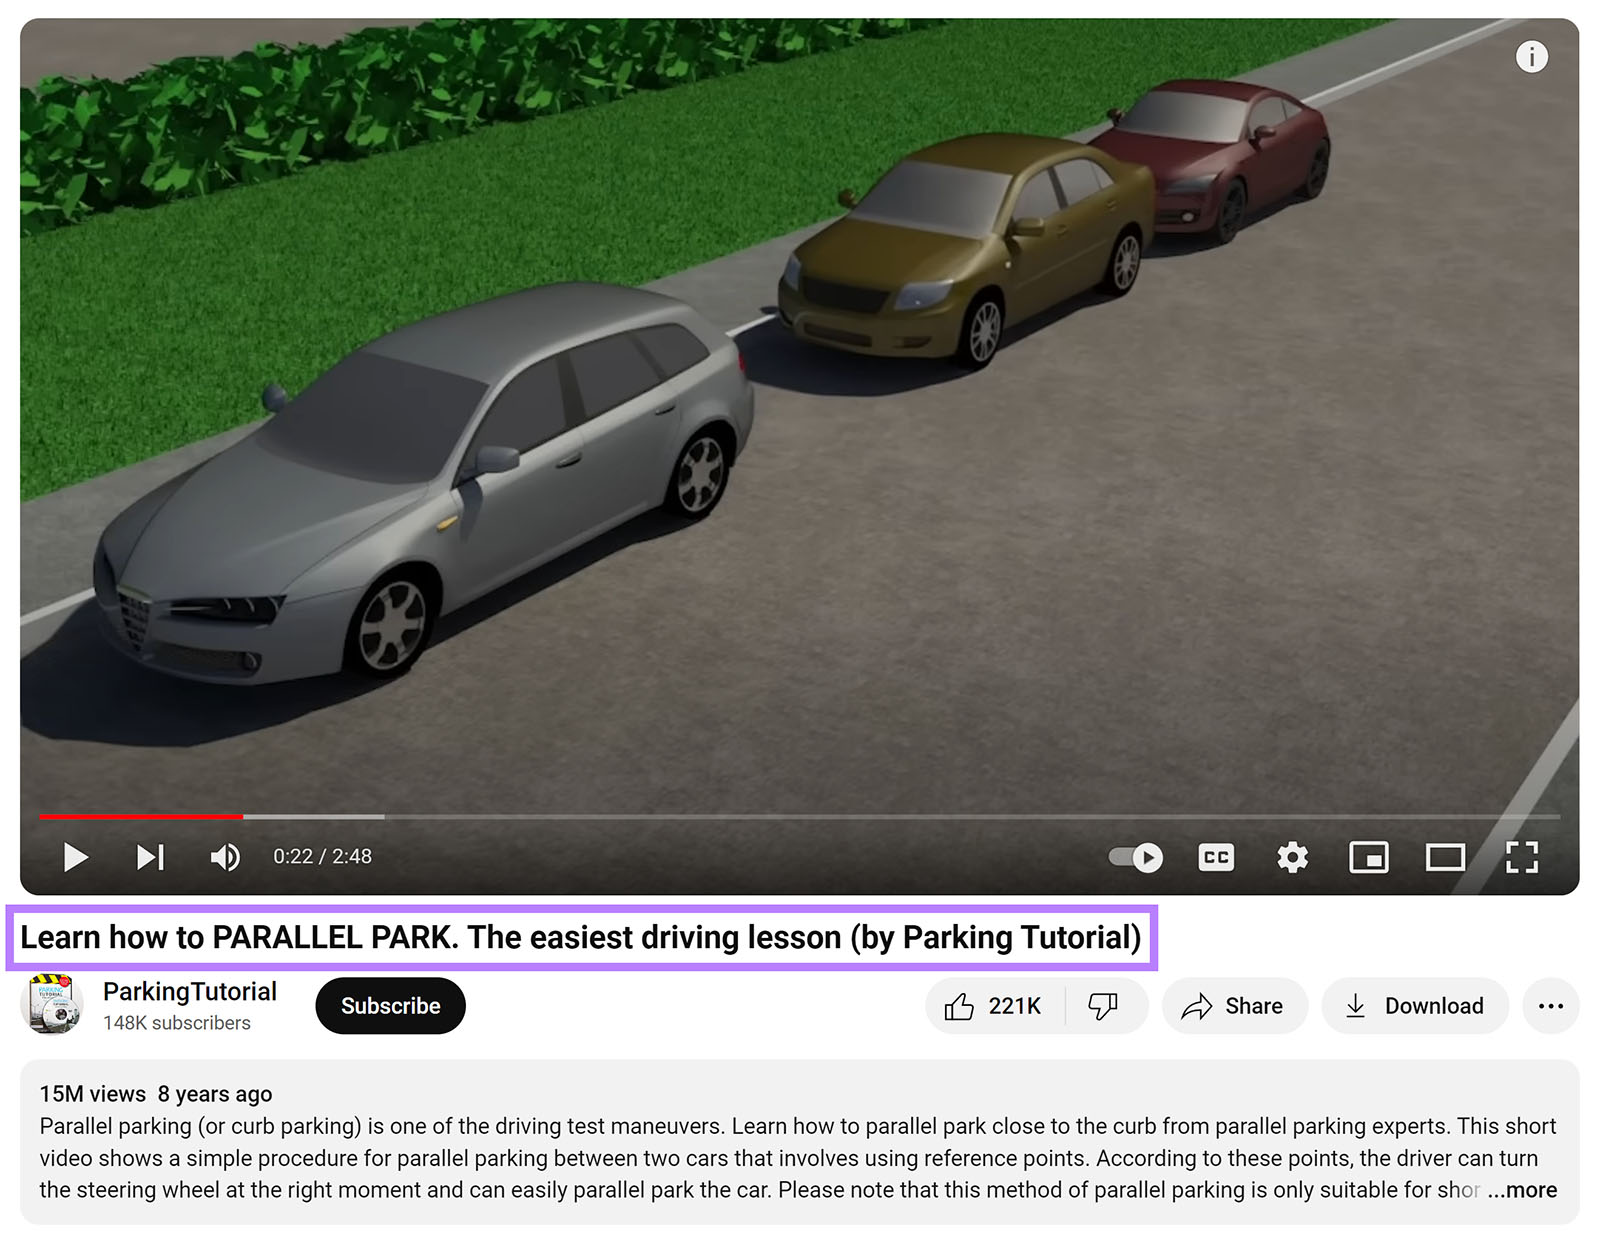 Engaging YouTube video title on parallel parking with video title highlighted.